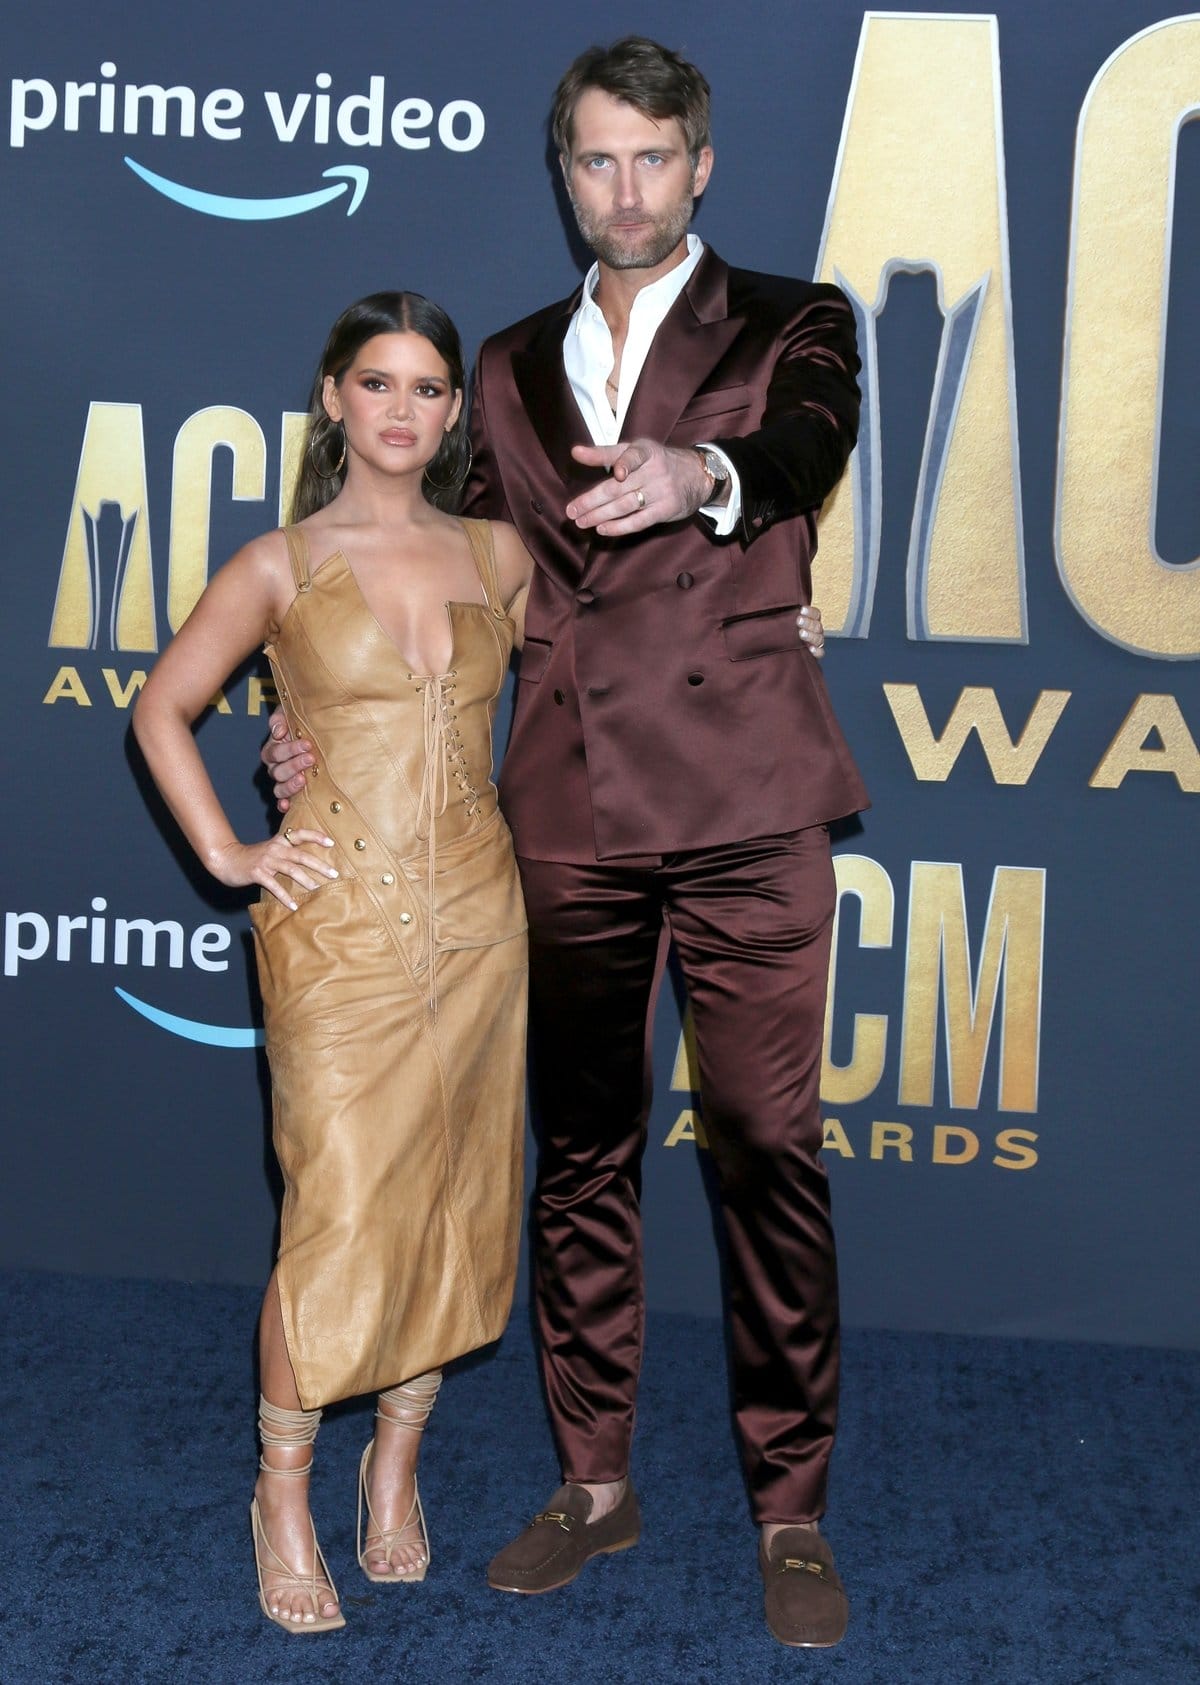 Maren Morris in a vintage Dior dress with her husband Ryan James Hurd in Paul Smith at the 2022 Academy of Country Music Awards